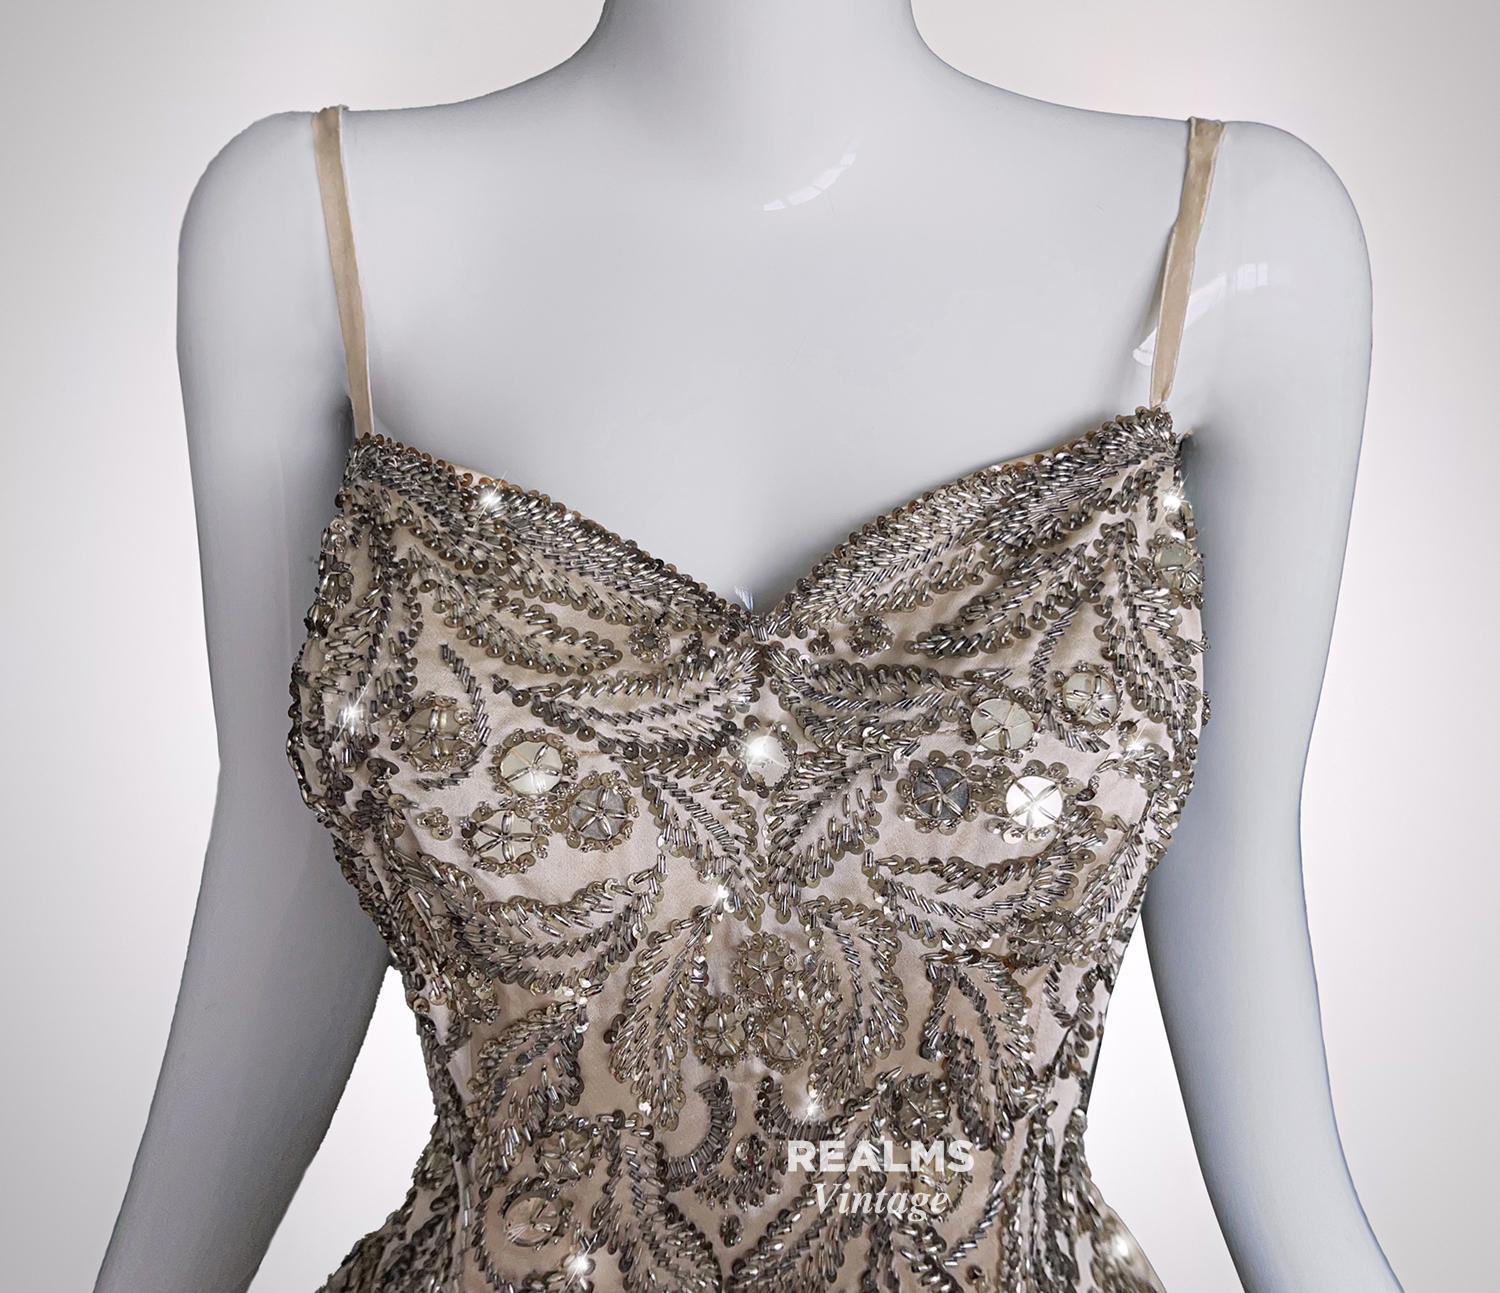 'La Robe Broderie À Ramages'
PIERRE BALMAIN PARIS
Made In France, ca.1955

Majestic evening gown in silk and cream satin with the most astonishing embroiderery by PIERRE BALMAIN Haute Couture workshop bolduc, numbered 33, named handwritten and